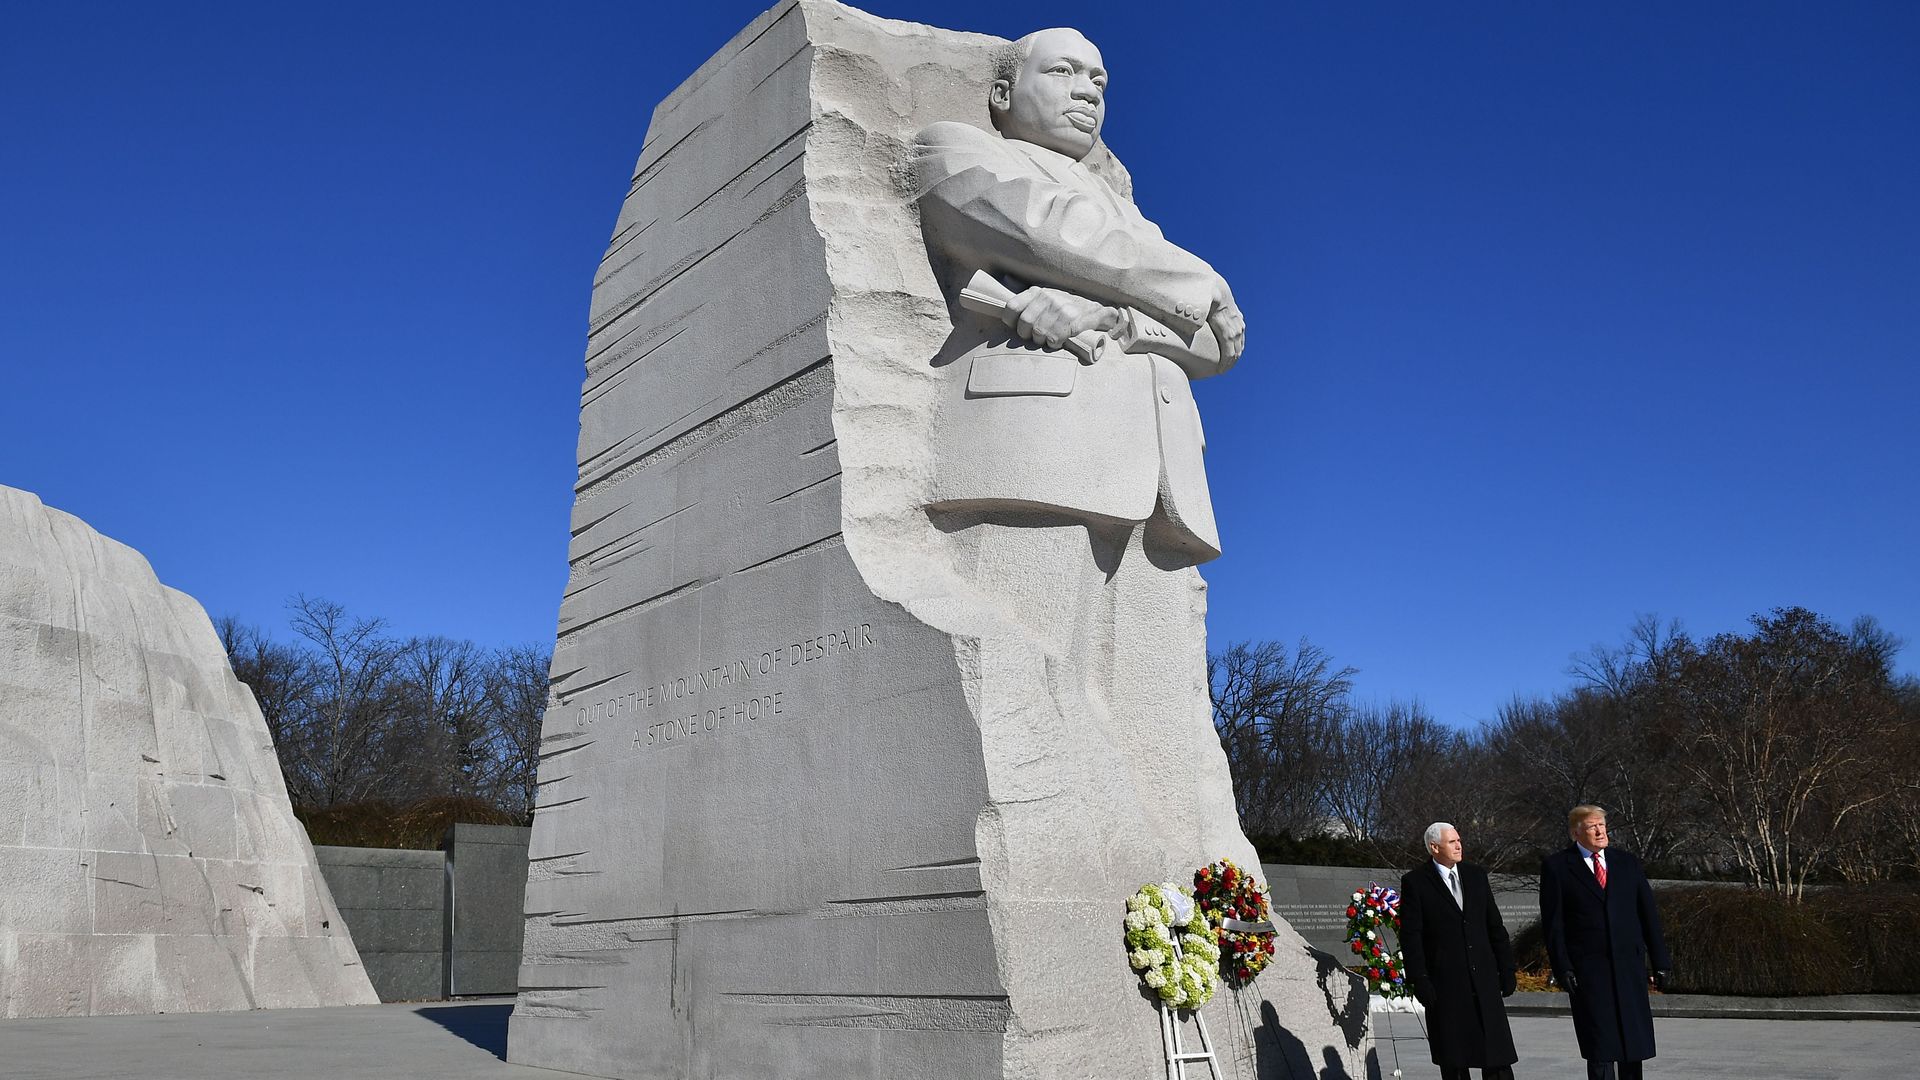 President Trump and Vice President Mike Pence stand in front of the Martin Luther King statue at the King memorial